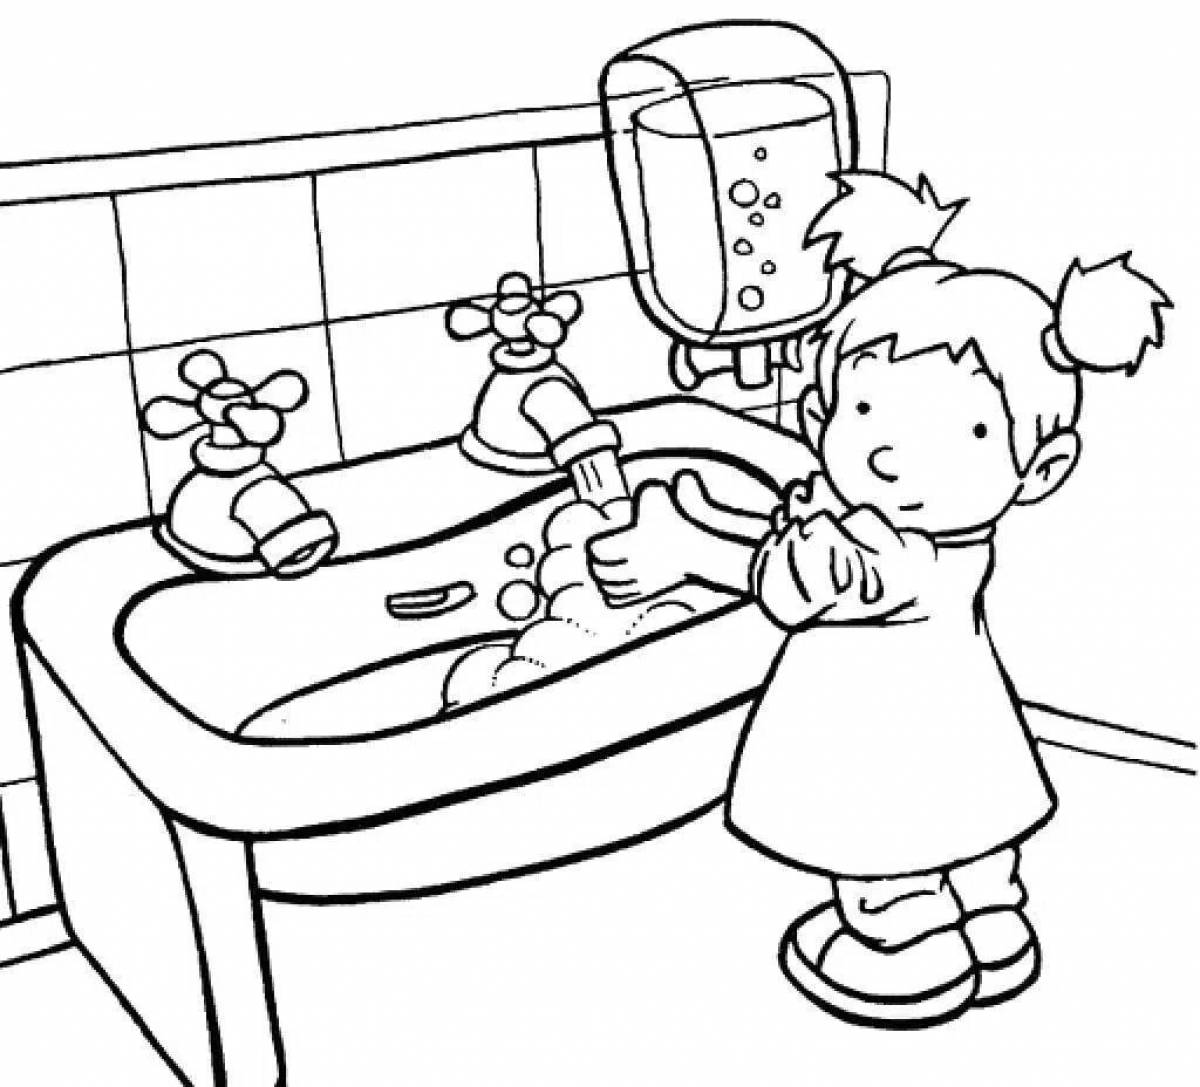 Calming health coloring page for the elderly